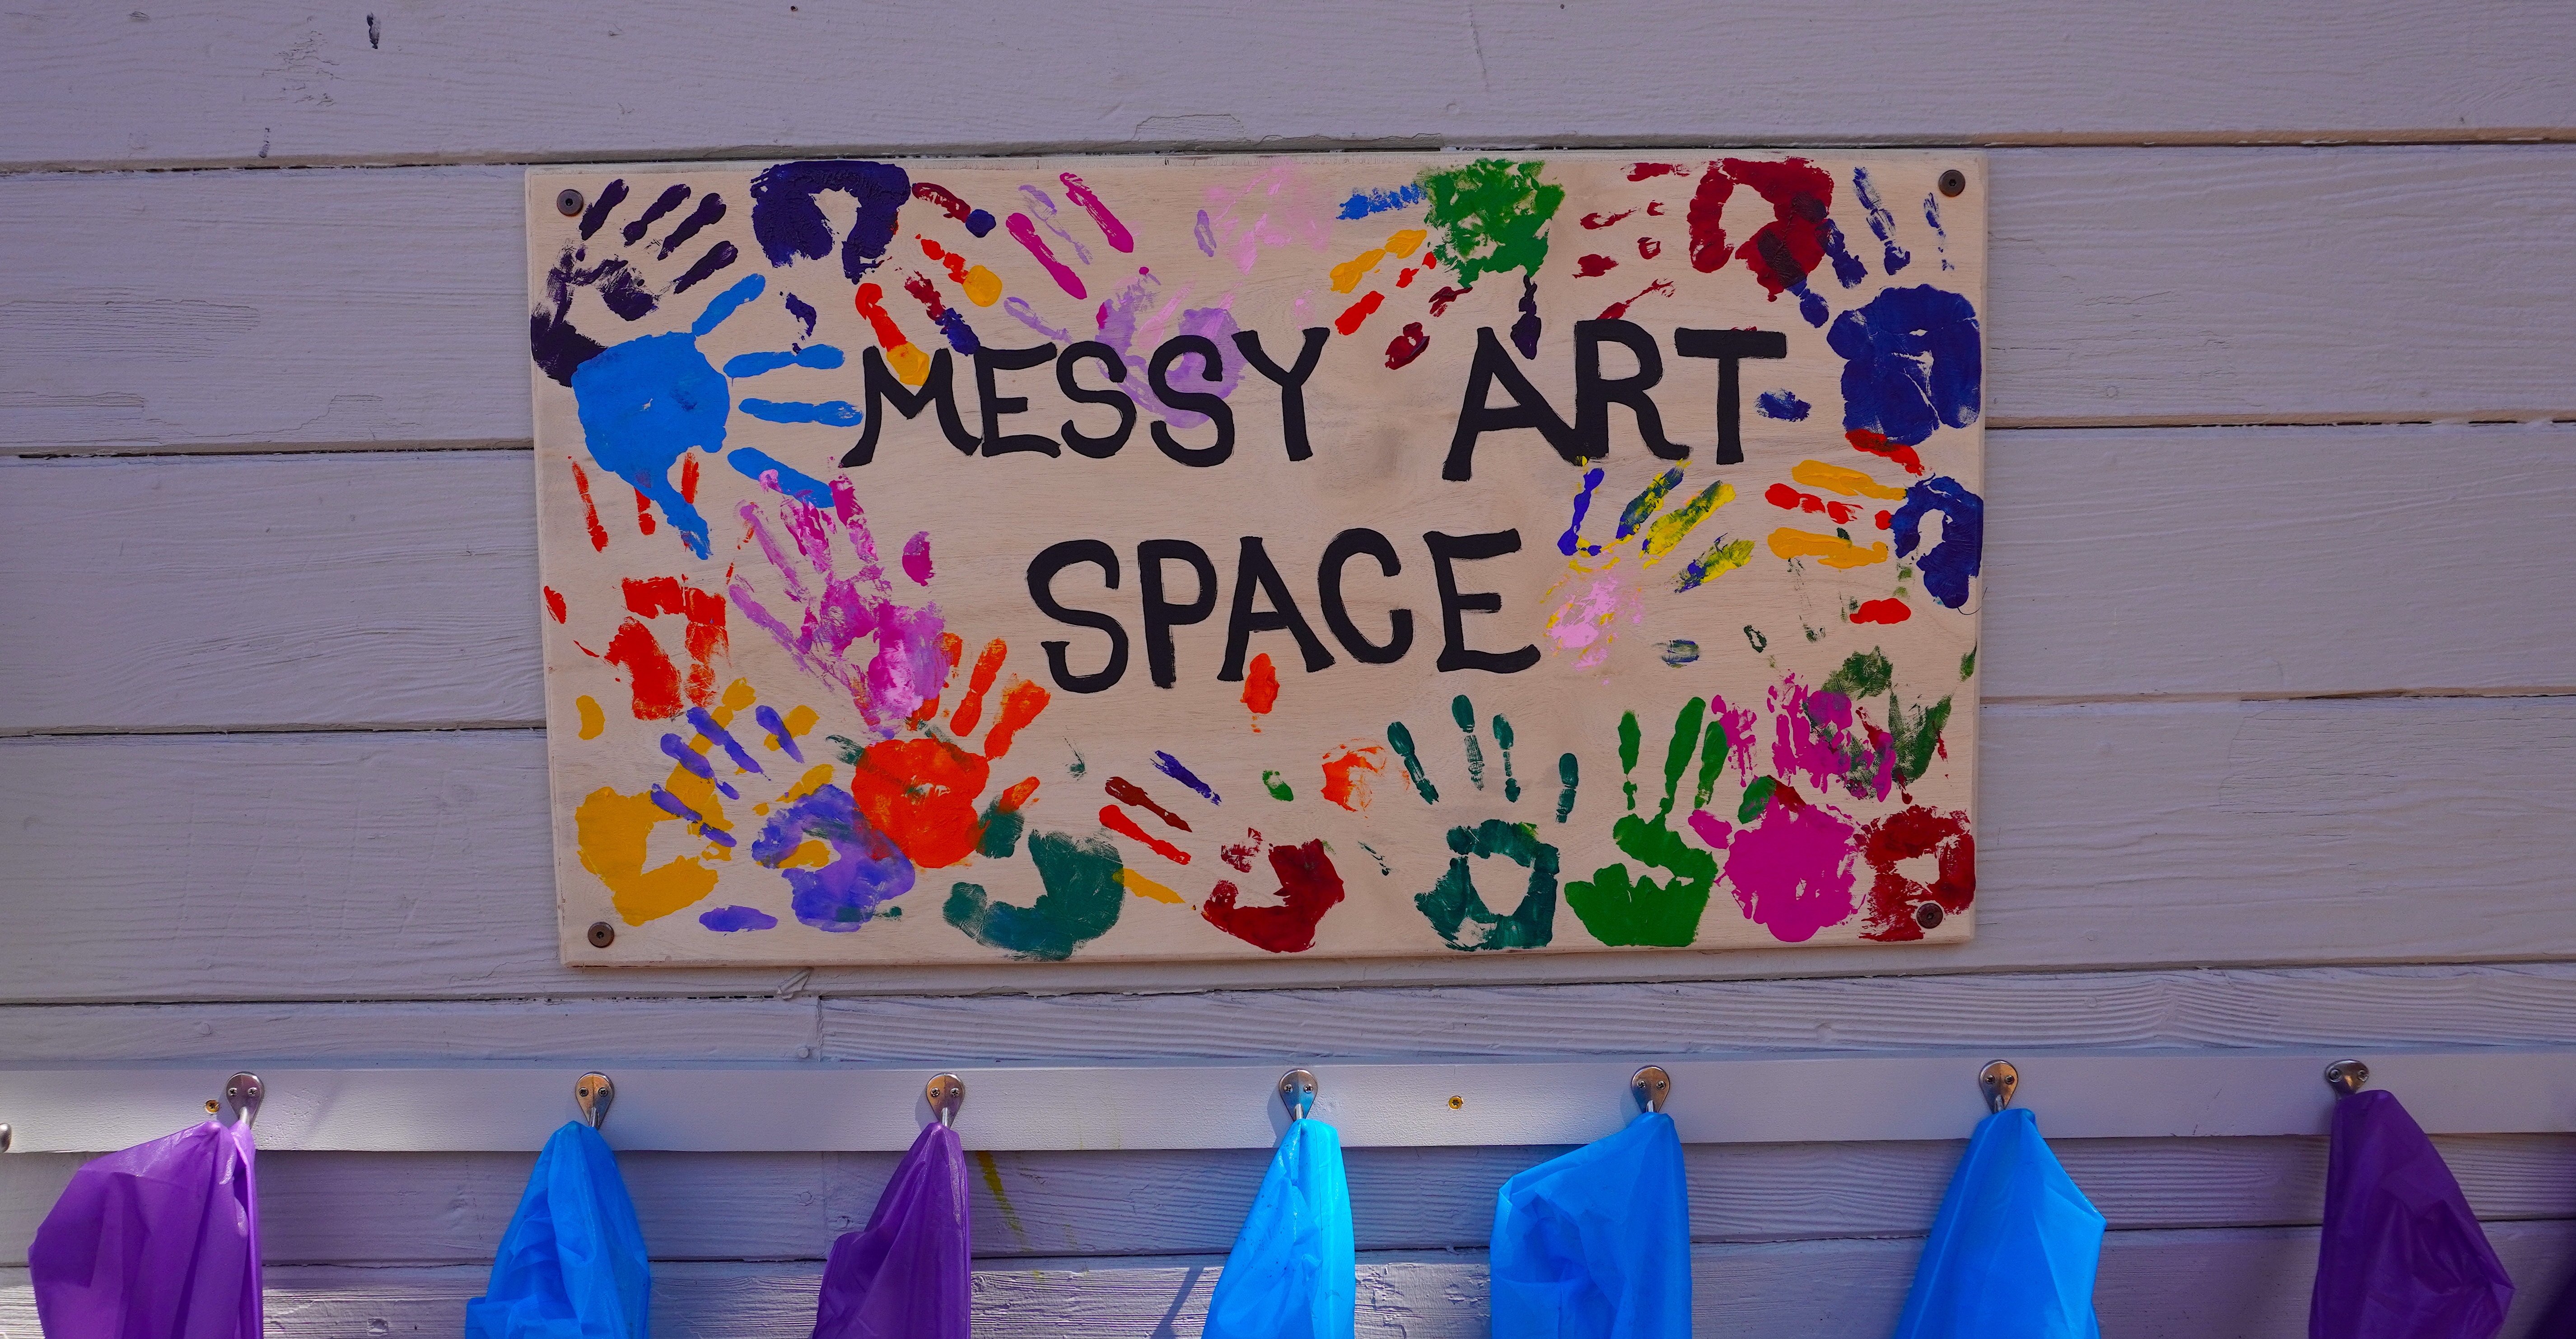 The Messy Art Space entrance sign with a rainbow border of handprints from all the teachers and staff members who made the space possible